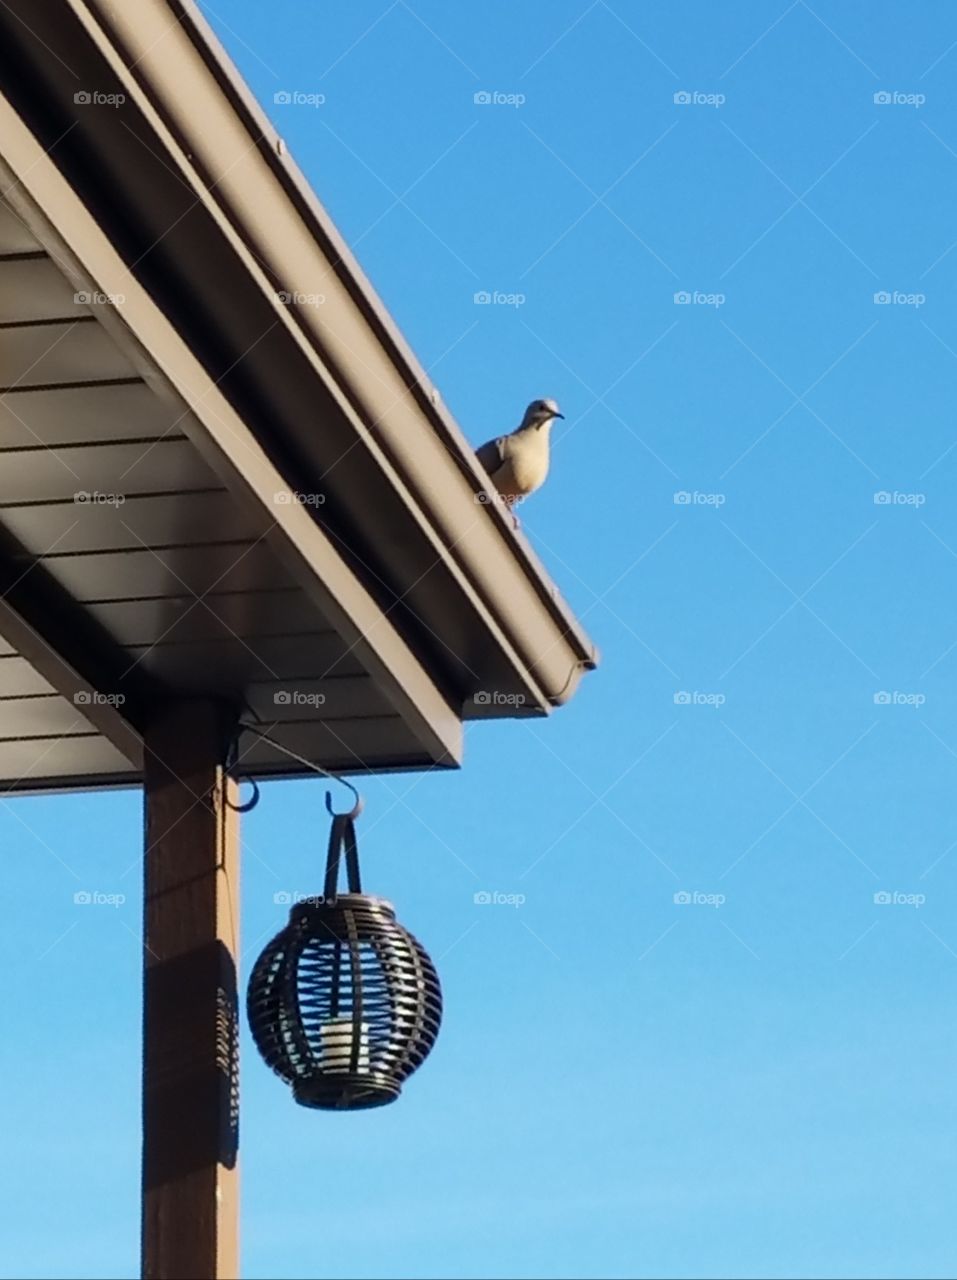 Morning Dove on the roof